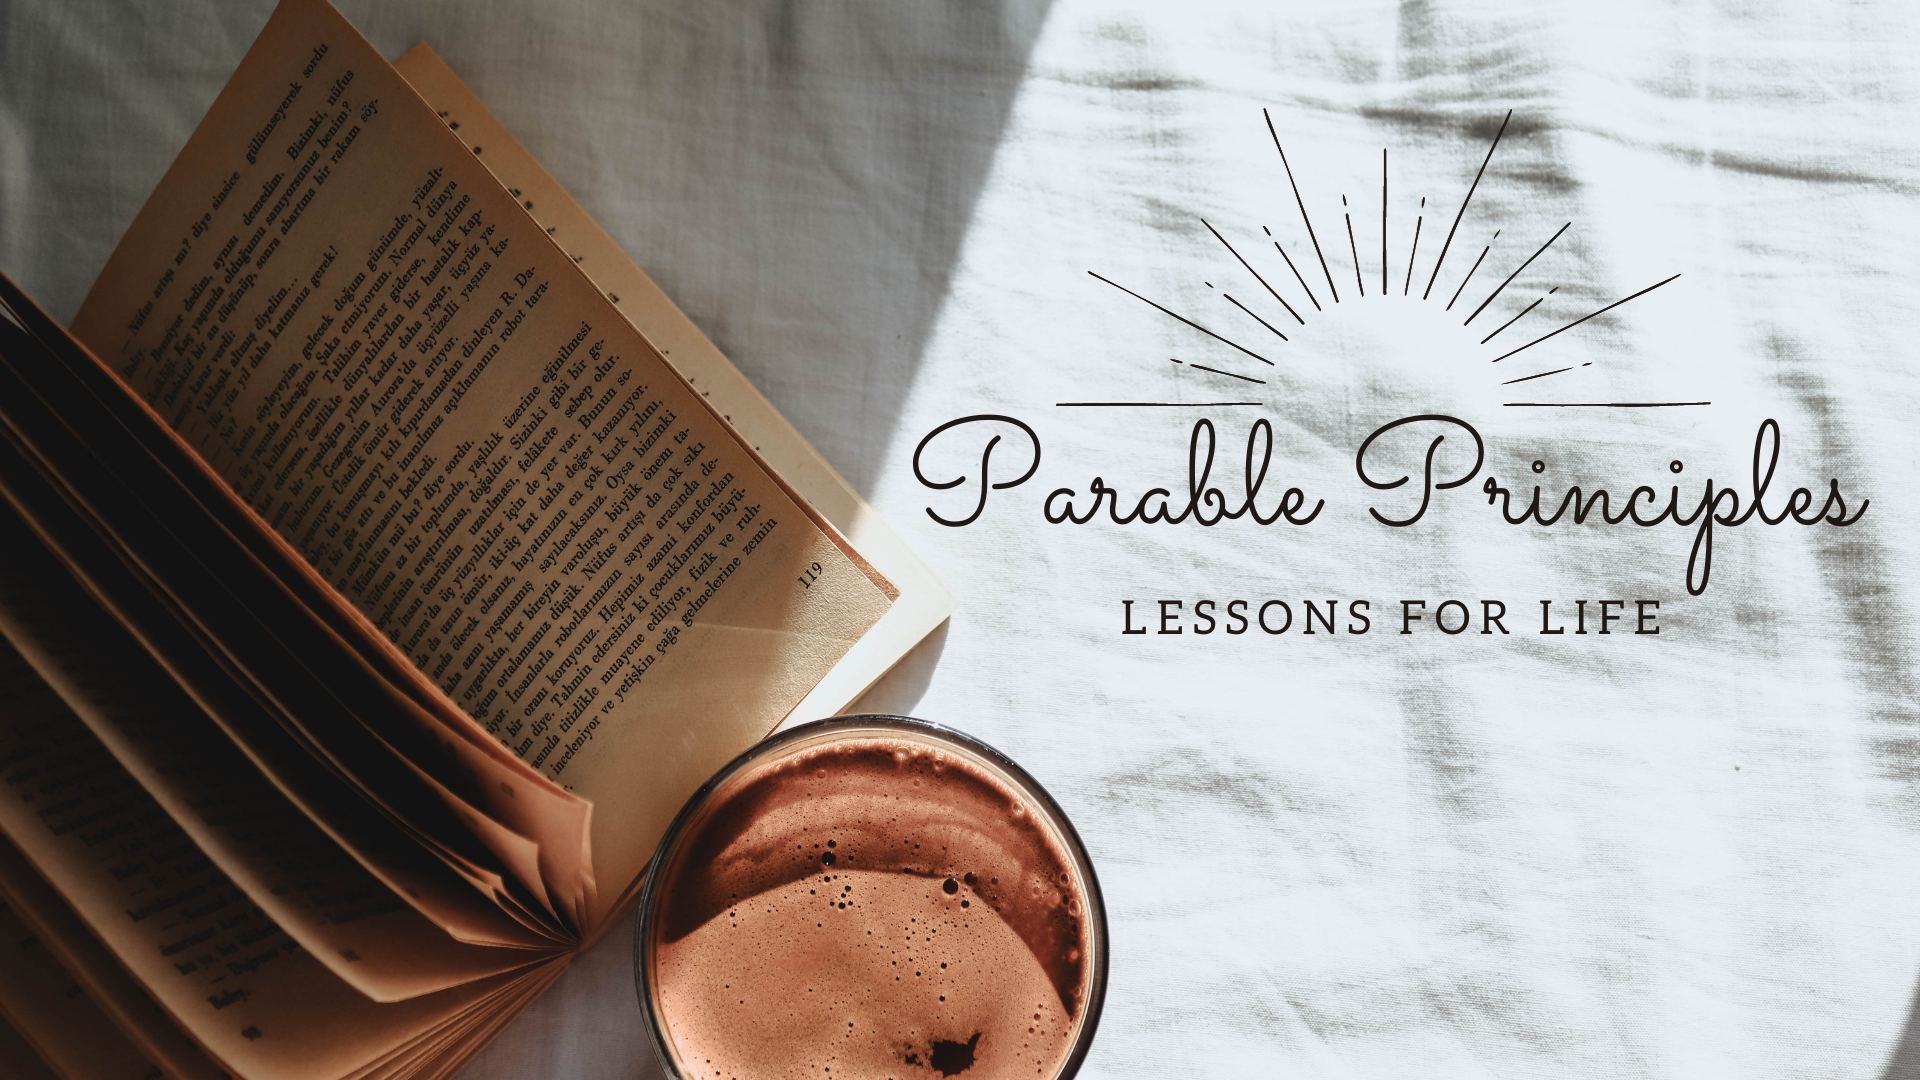 Principles from the Parables – “Won’t You Be My Neighbor”